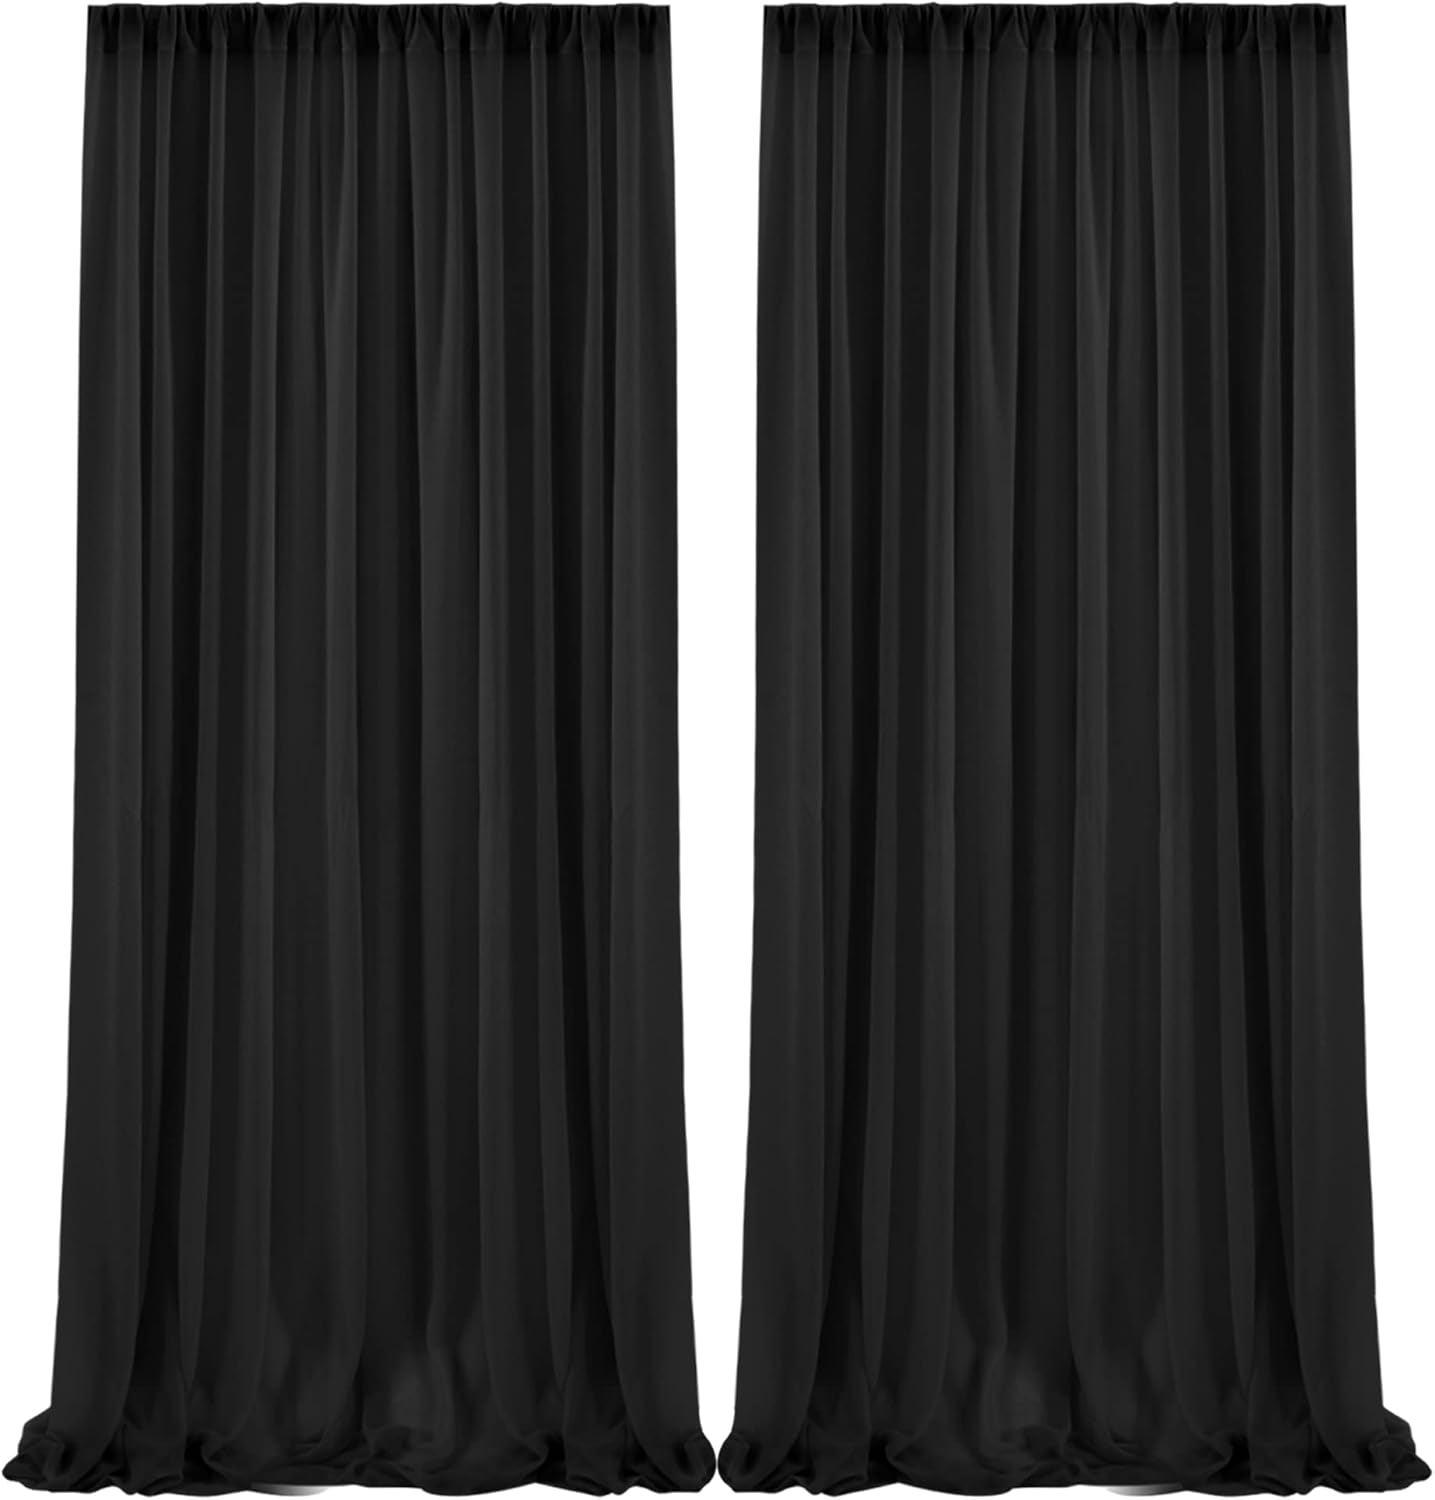 10Ft X 10Ft White Chiffon Backdrop Curtains, Wrinkle-Free Sheer Chiffon Fabric Curtain Drapes for Wedding Ceremony Arch Party Stage Decoration  Wish Care Black  